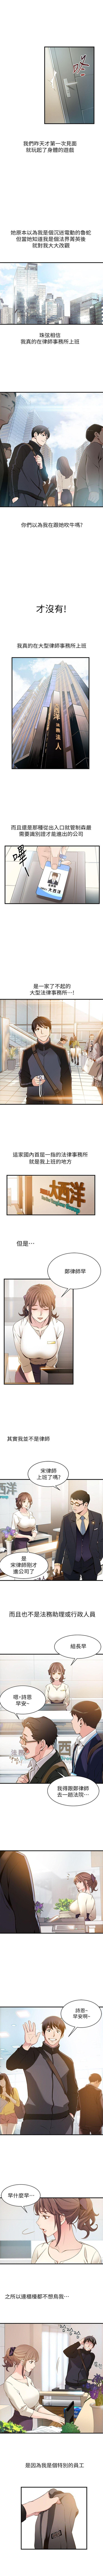 Live 弱點 1-101 官方中文（連載中） Shower - Page 4